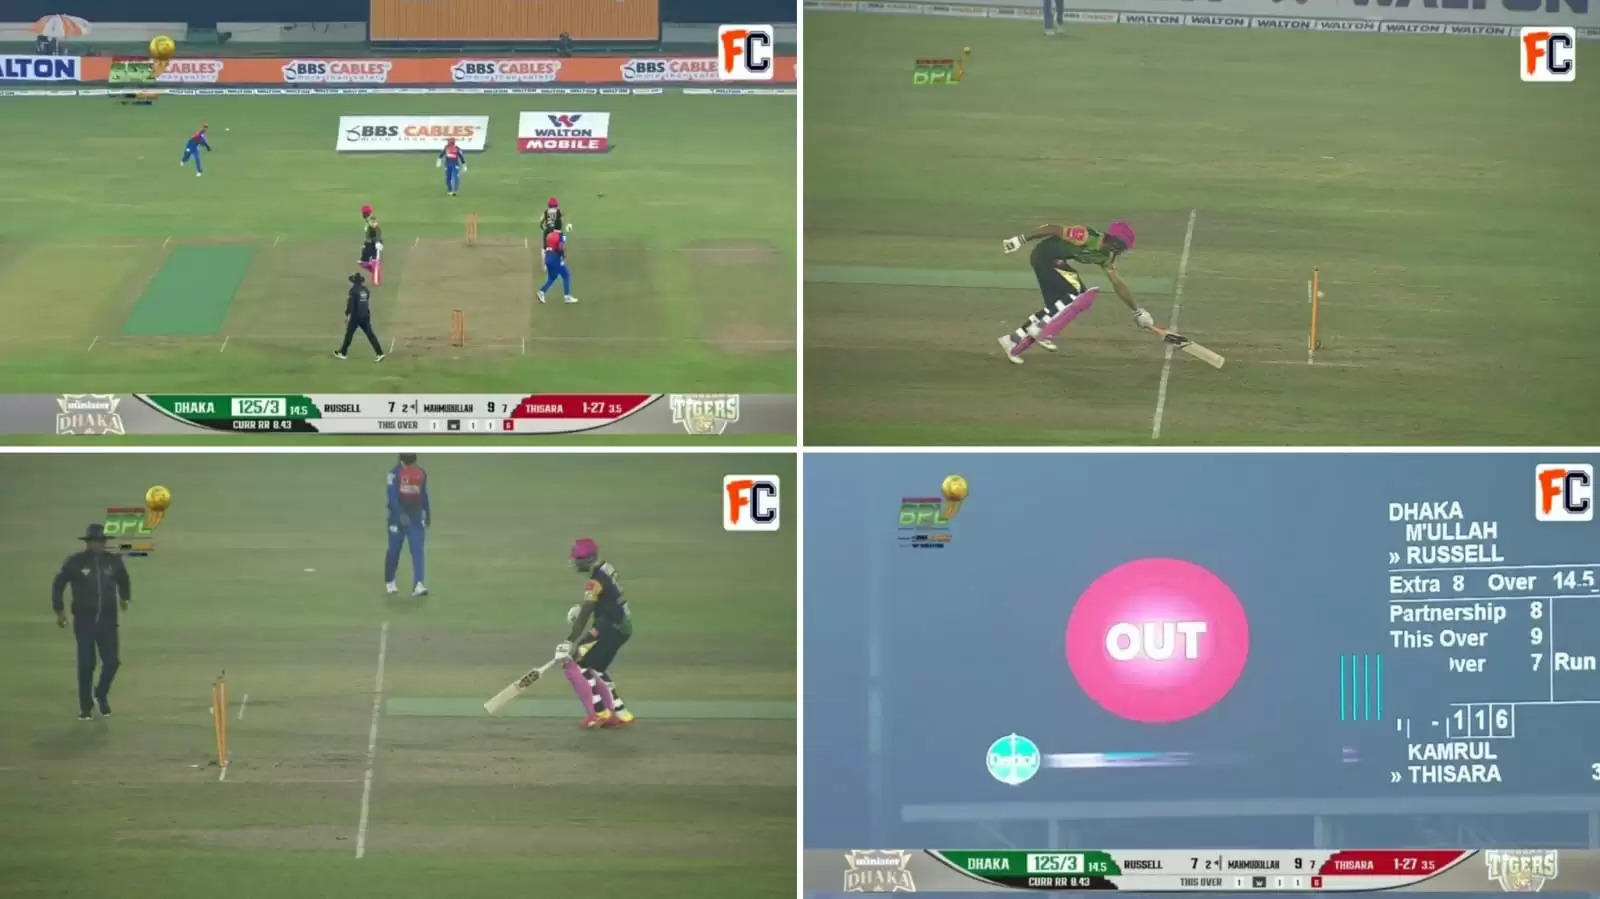 Watch: Shock throw in BPL deflects off stumps & hits other to run Andre Russell out